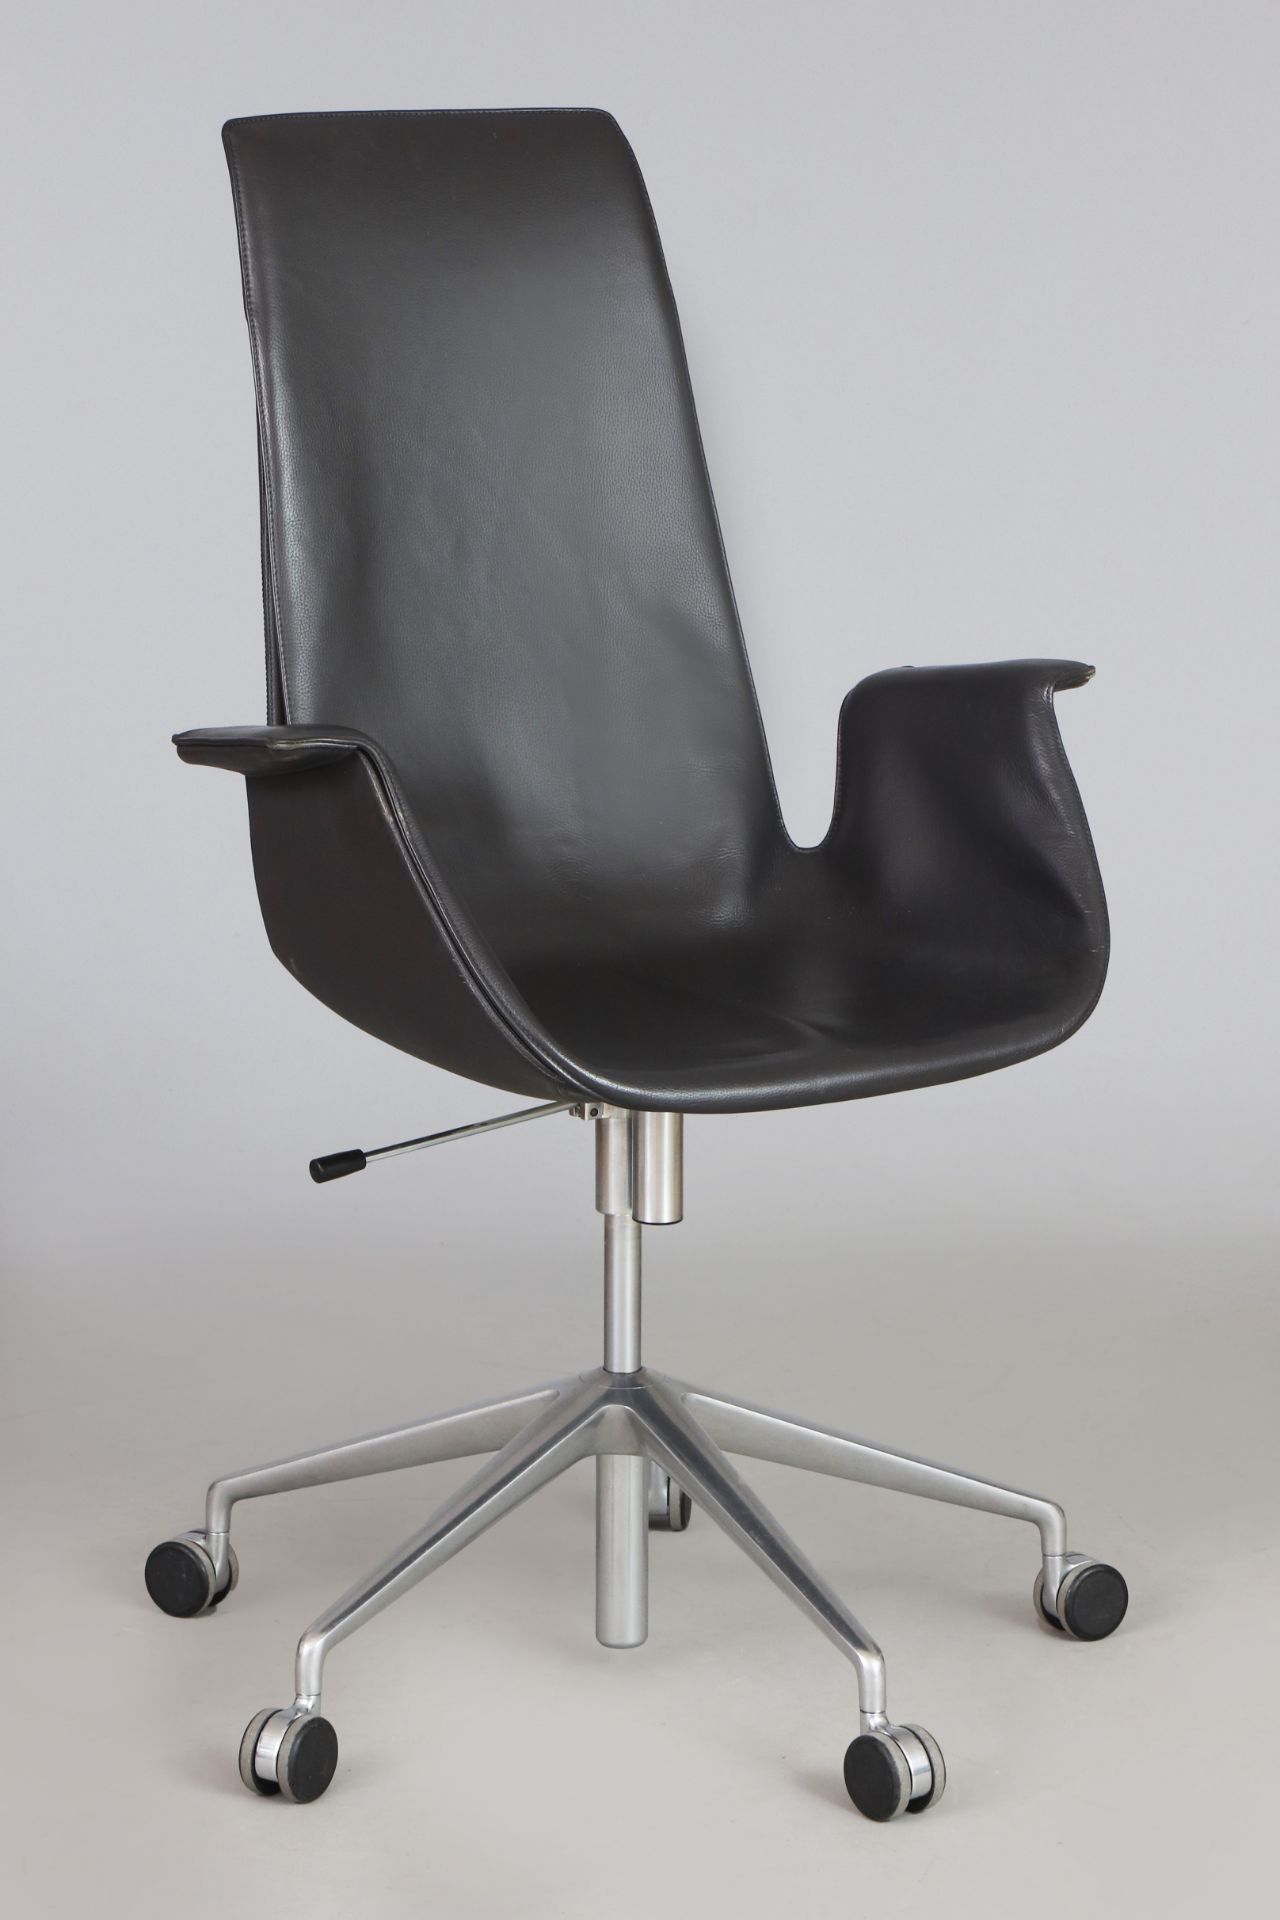 WALTER KNOLL FK 6725 Tulip Chair - Image 2 of 4